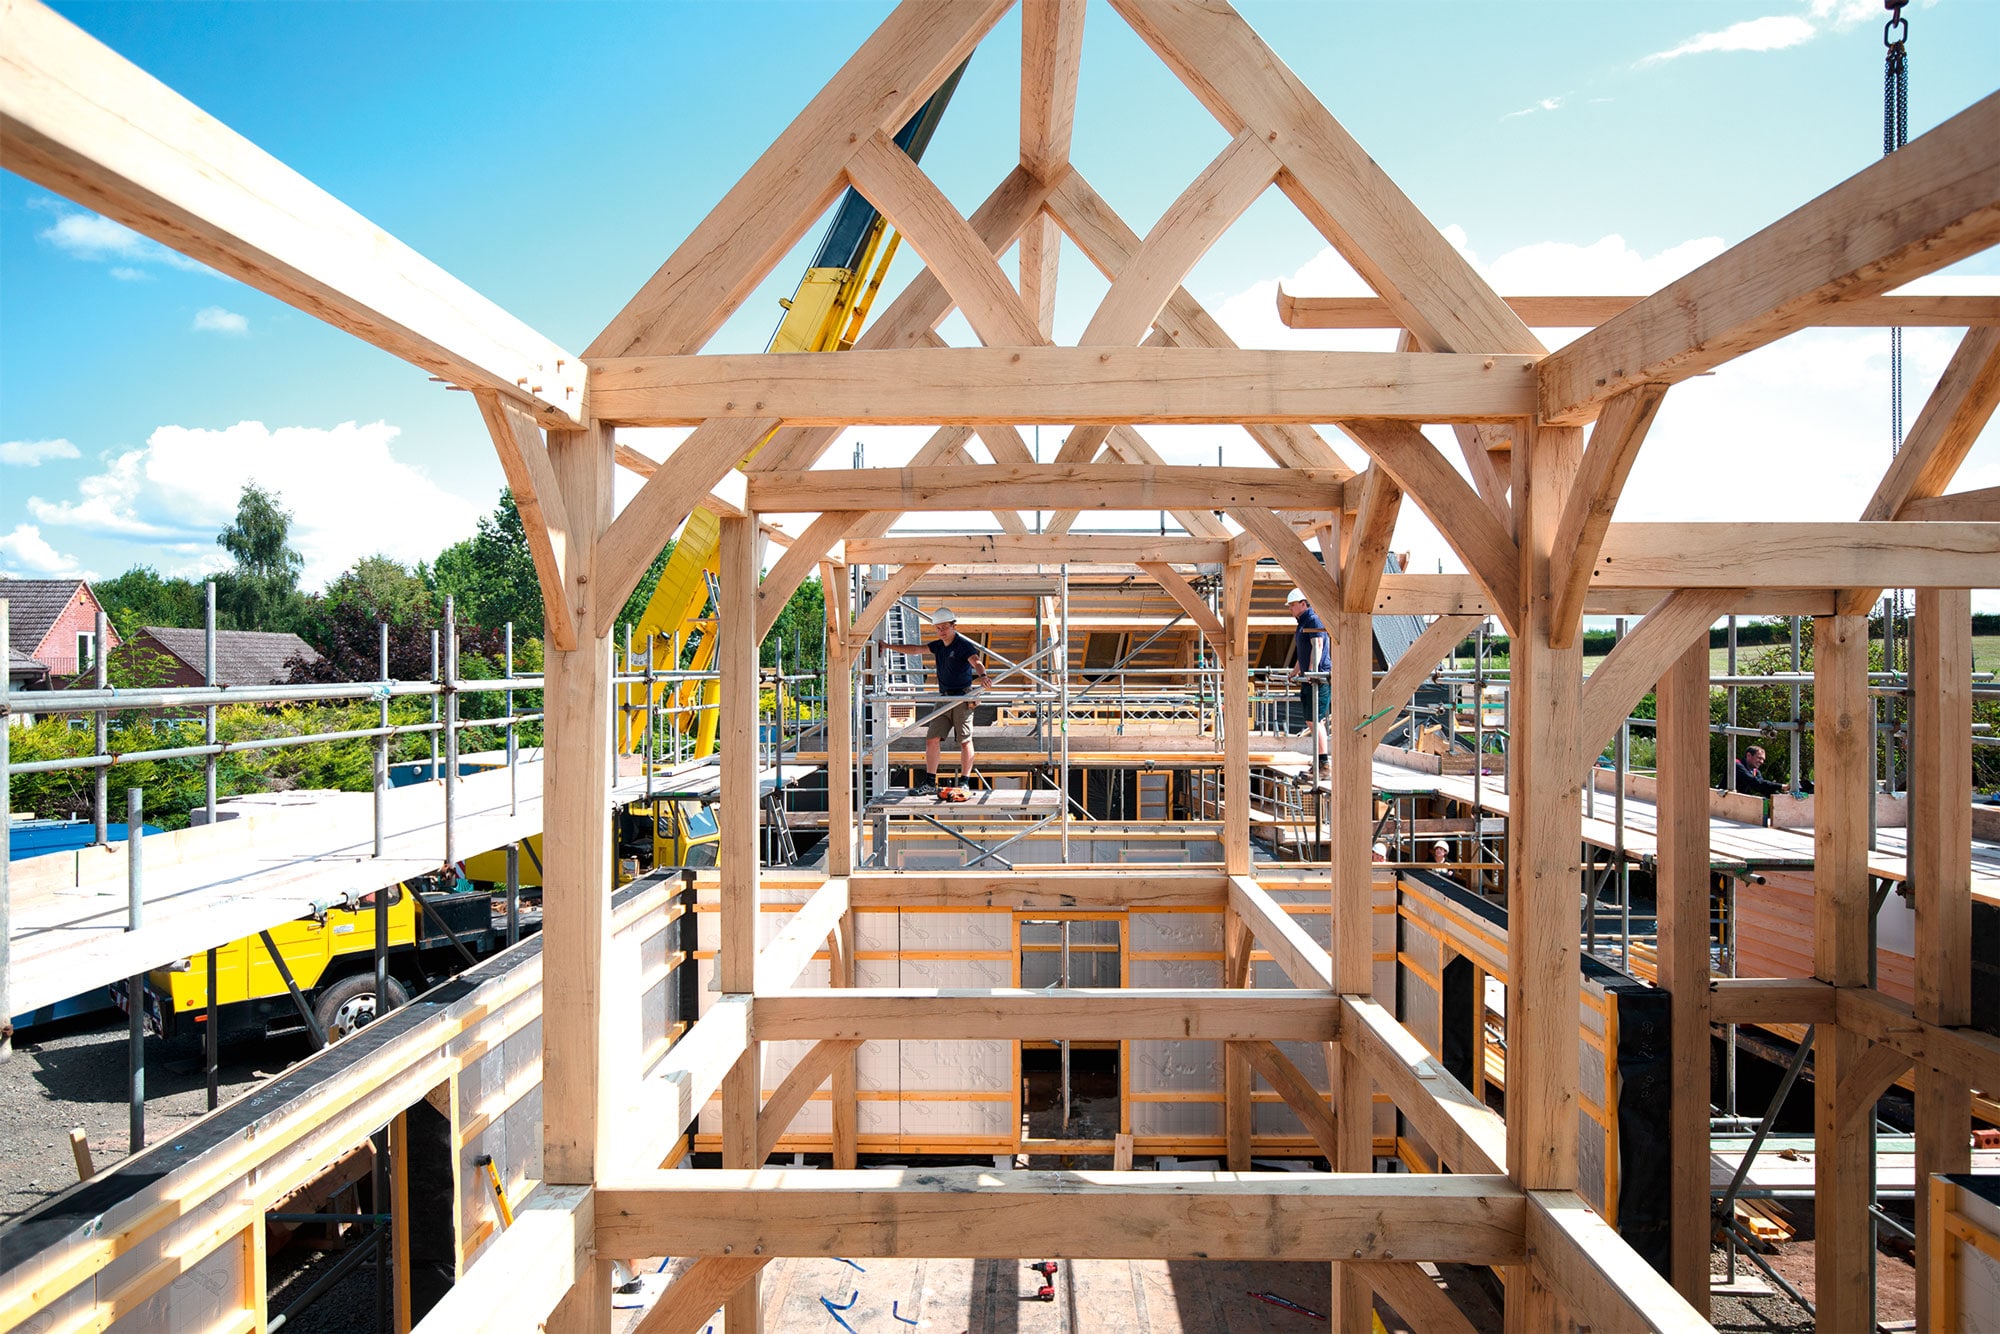 6 Construction Systems for Your Self Build Project - Build It